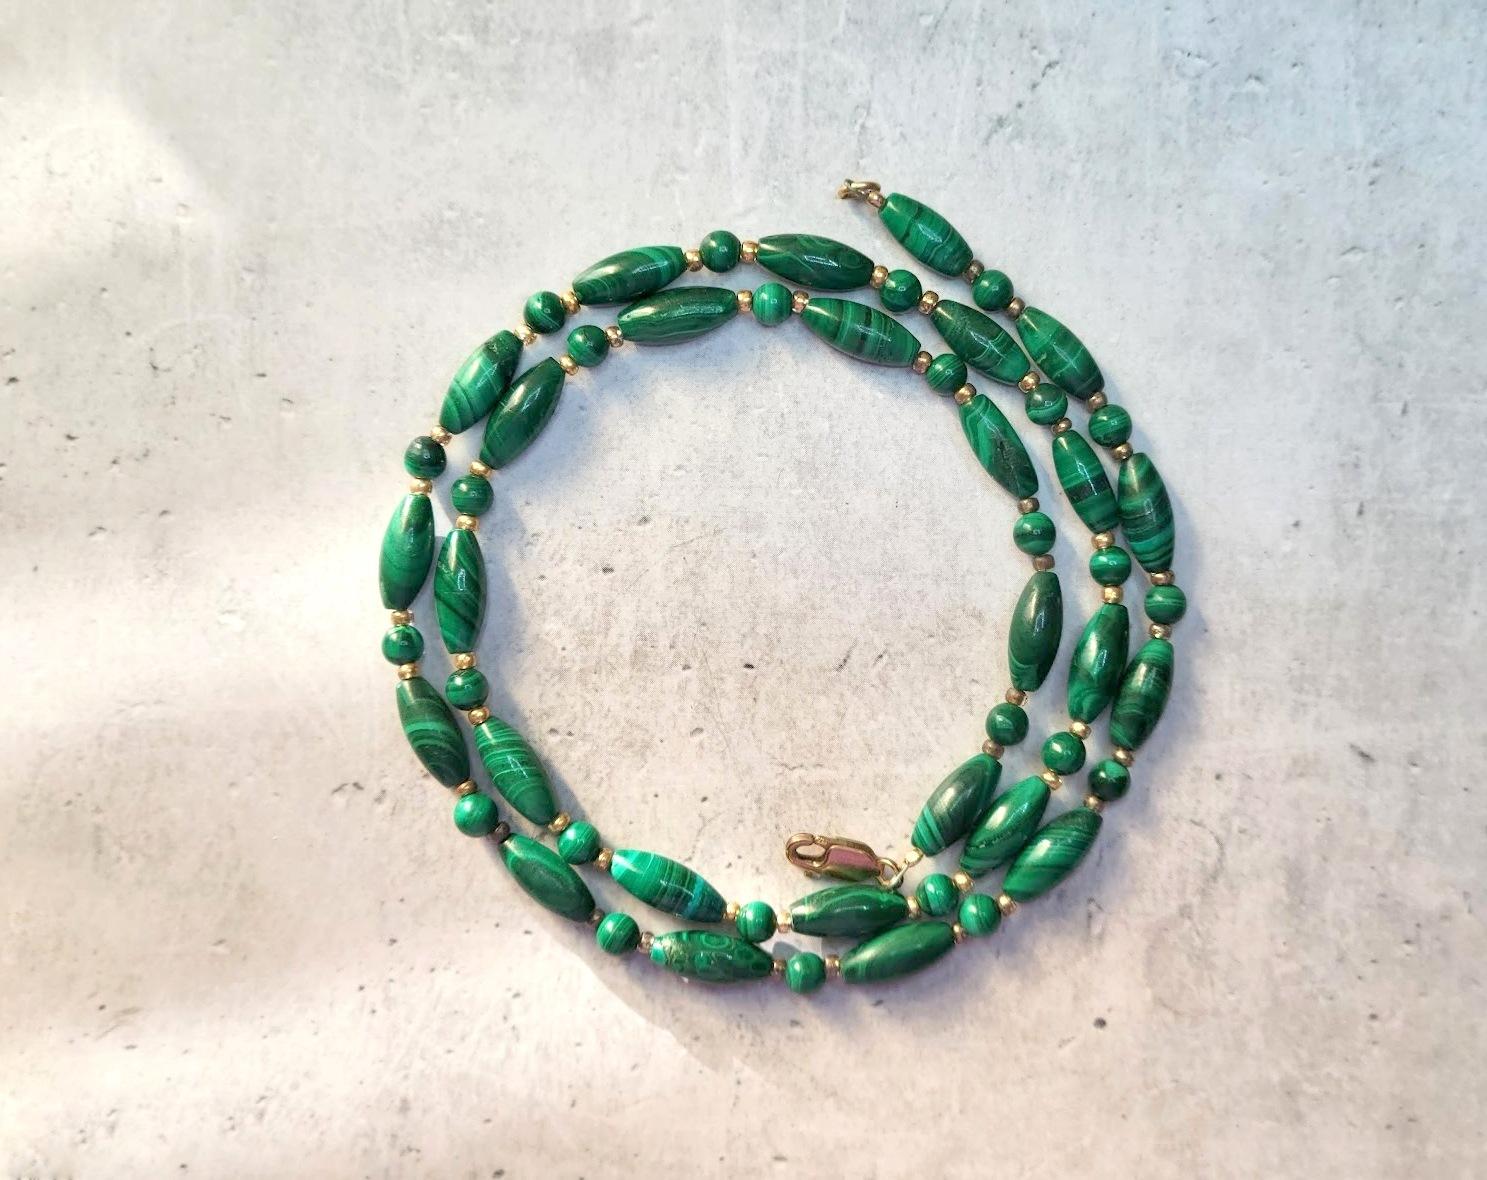 This necklace has a length of 20.5 inches (52 cm) and features smooth barrel beads measuring 12mm x 5mm and small round beads measuring 4mm. The color of the beads ranges from deep dark green to light green shades, and within the same stone, there